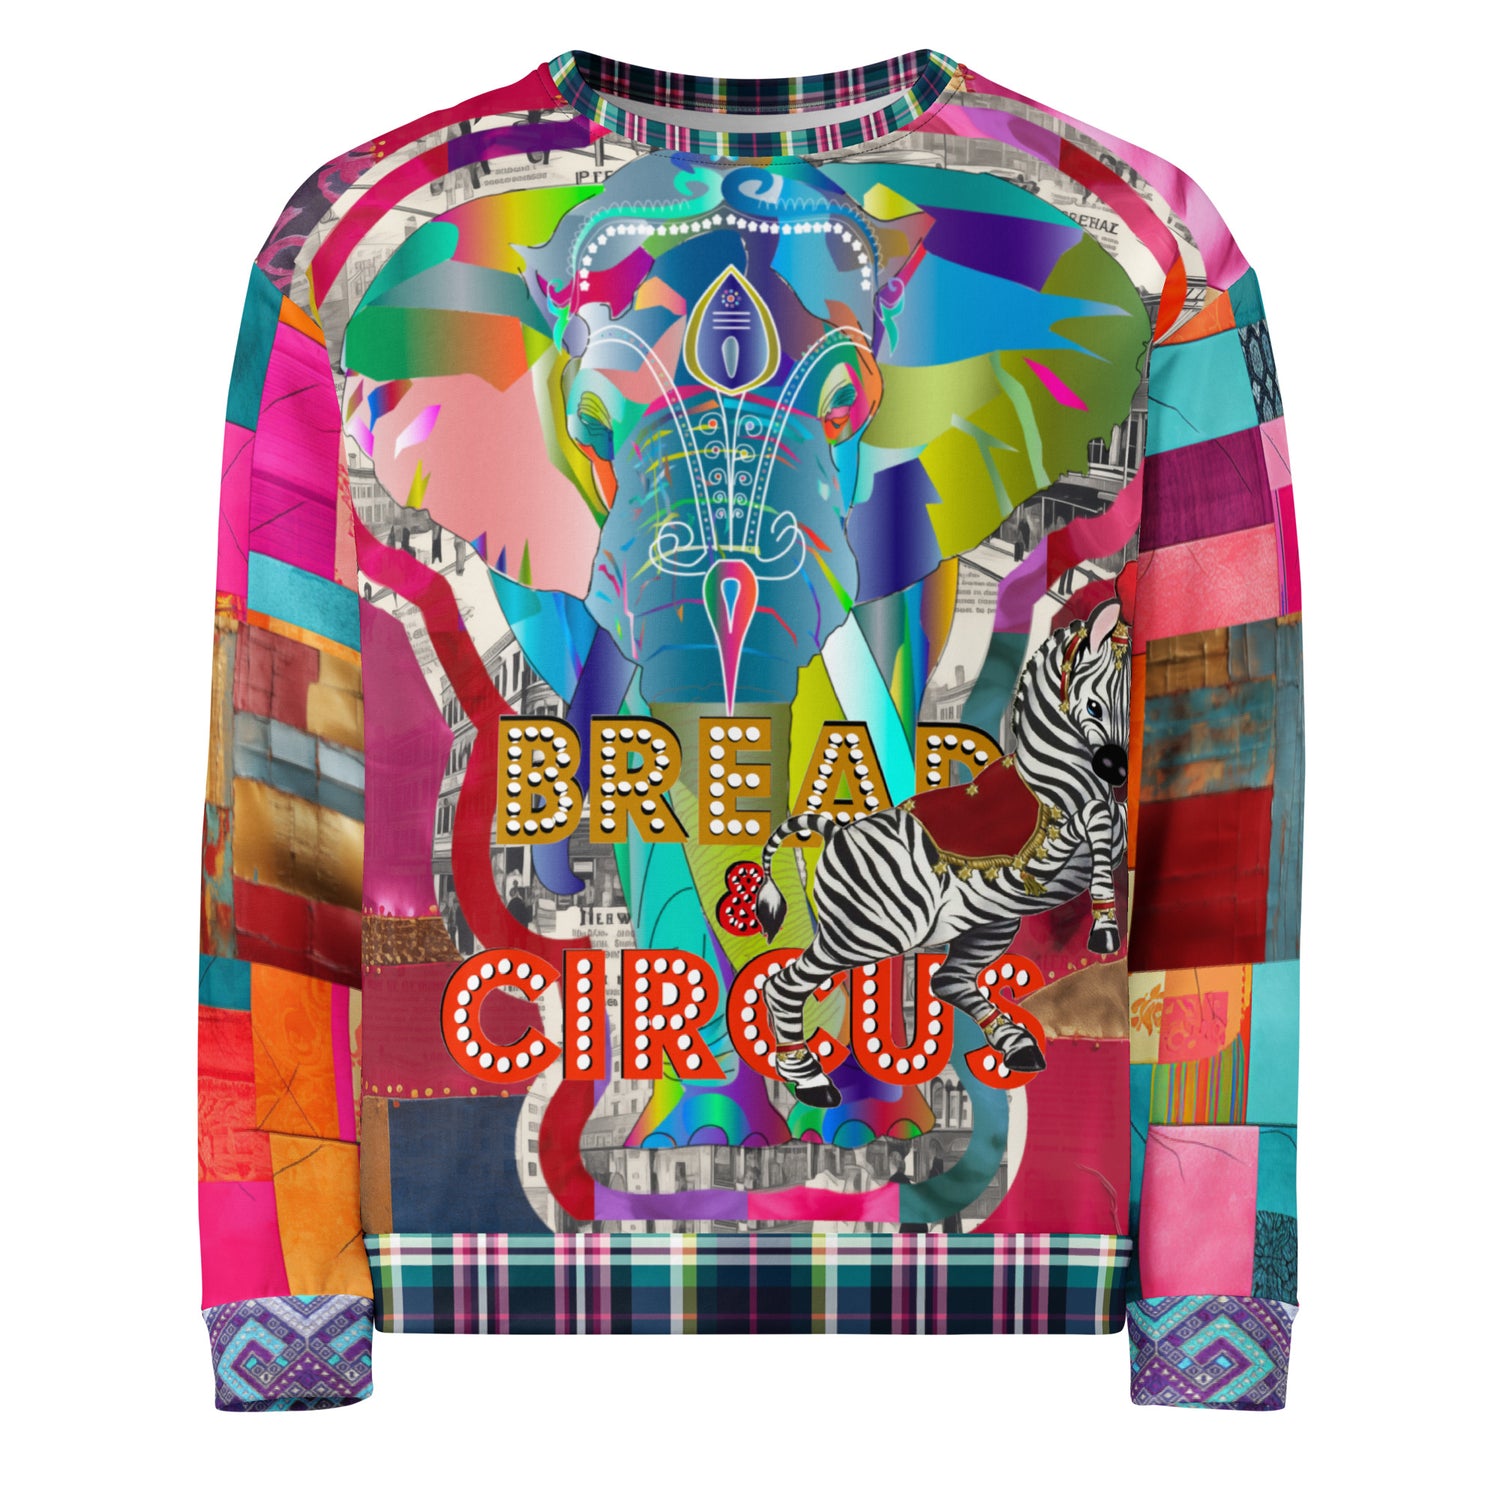 Bread and Circus Social Commentary Eco-Poly Unisex Sweatshirt